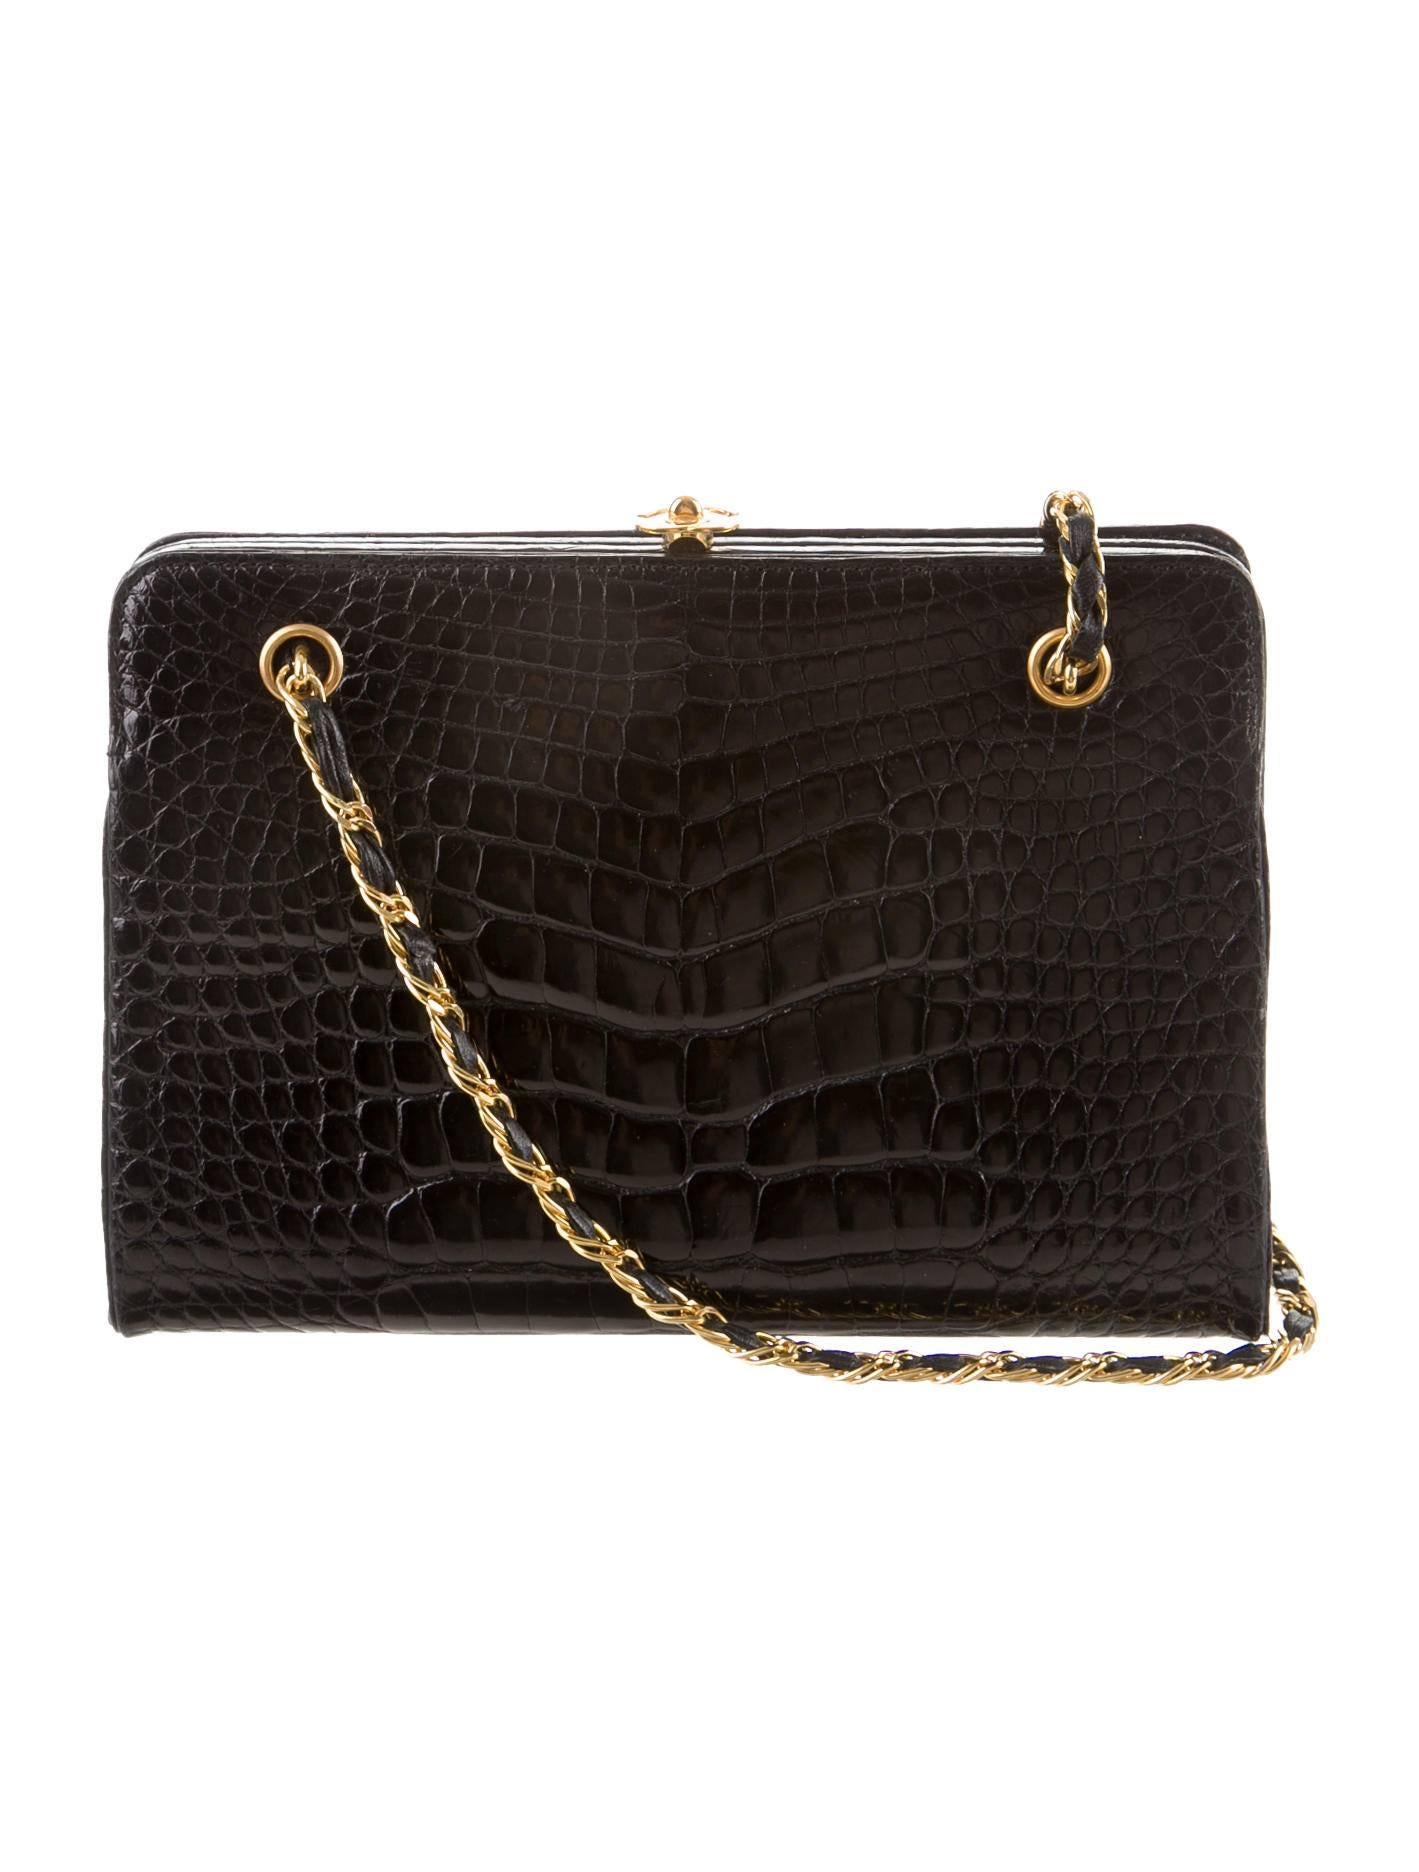 CURATOR'S NOTES

The holy grail of Chanel bags: The black alligator flap with gold CC kiss lock closure! Well maintained and preserved, this is a rare classic and collectible.

Alligator
Gold hardware
Leather interior
Two interior